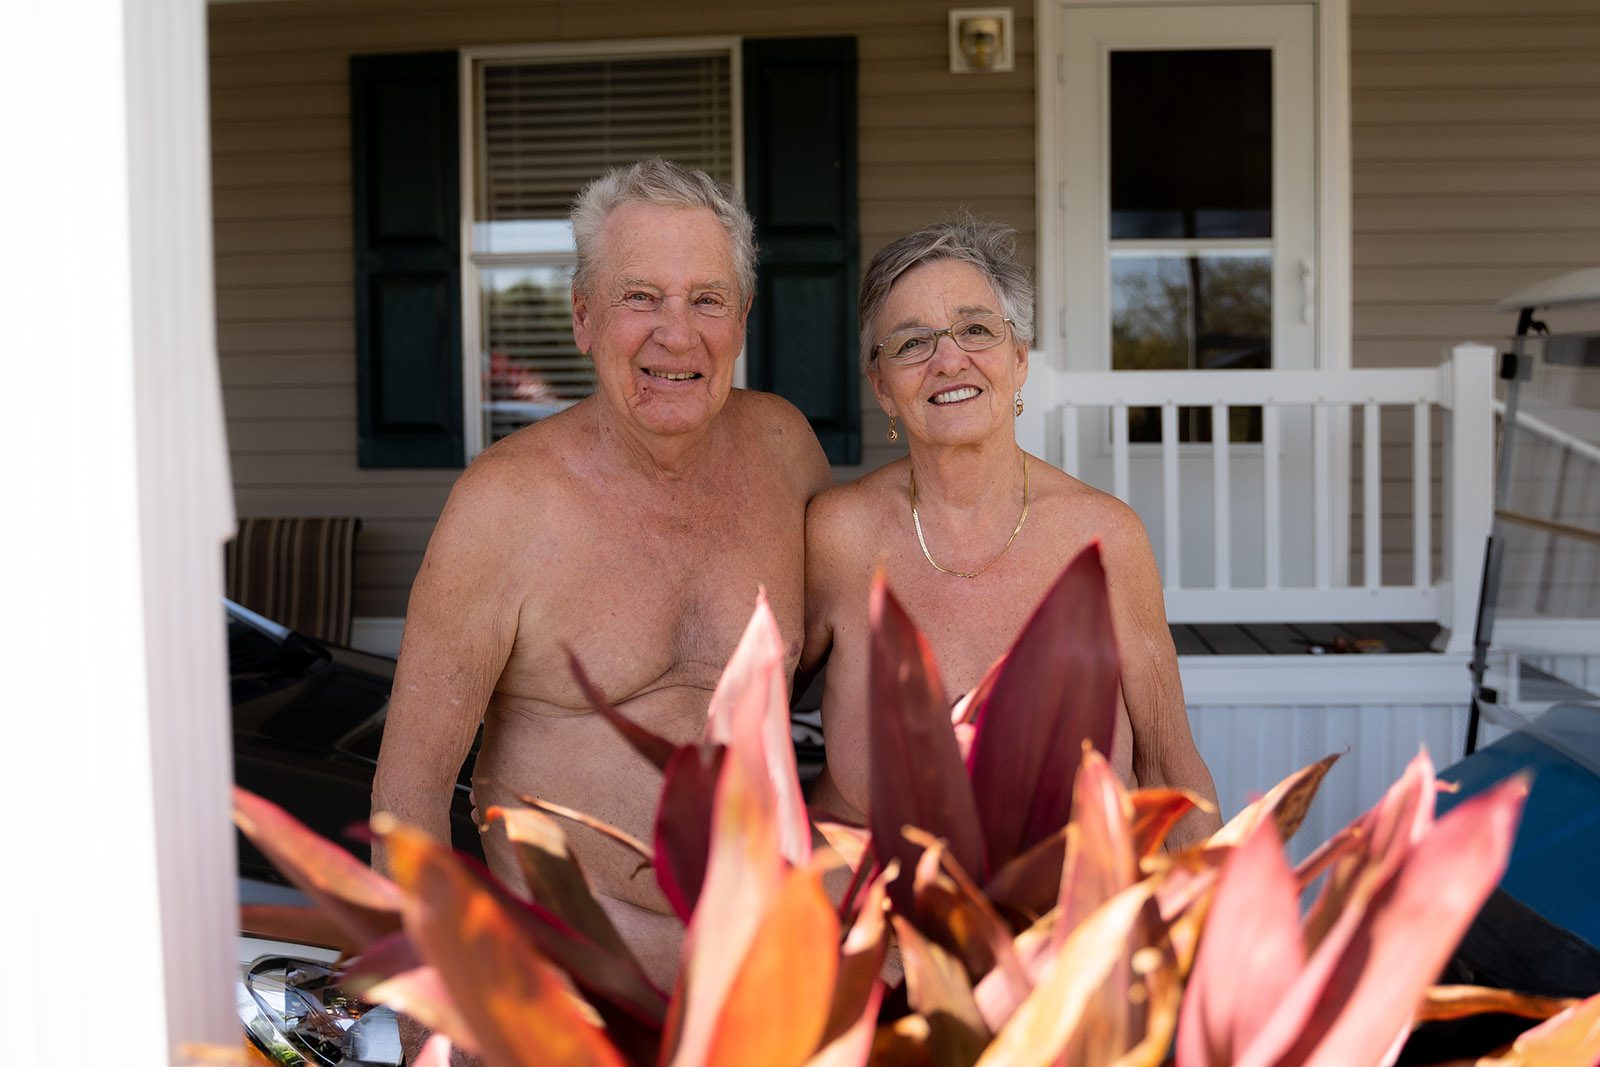 Naked and unashamed Christians strip down at a South Texas nudist community